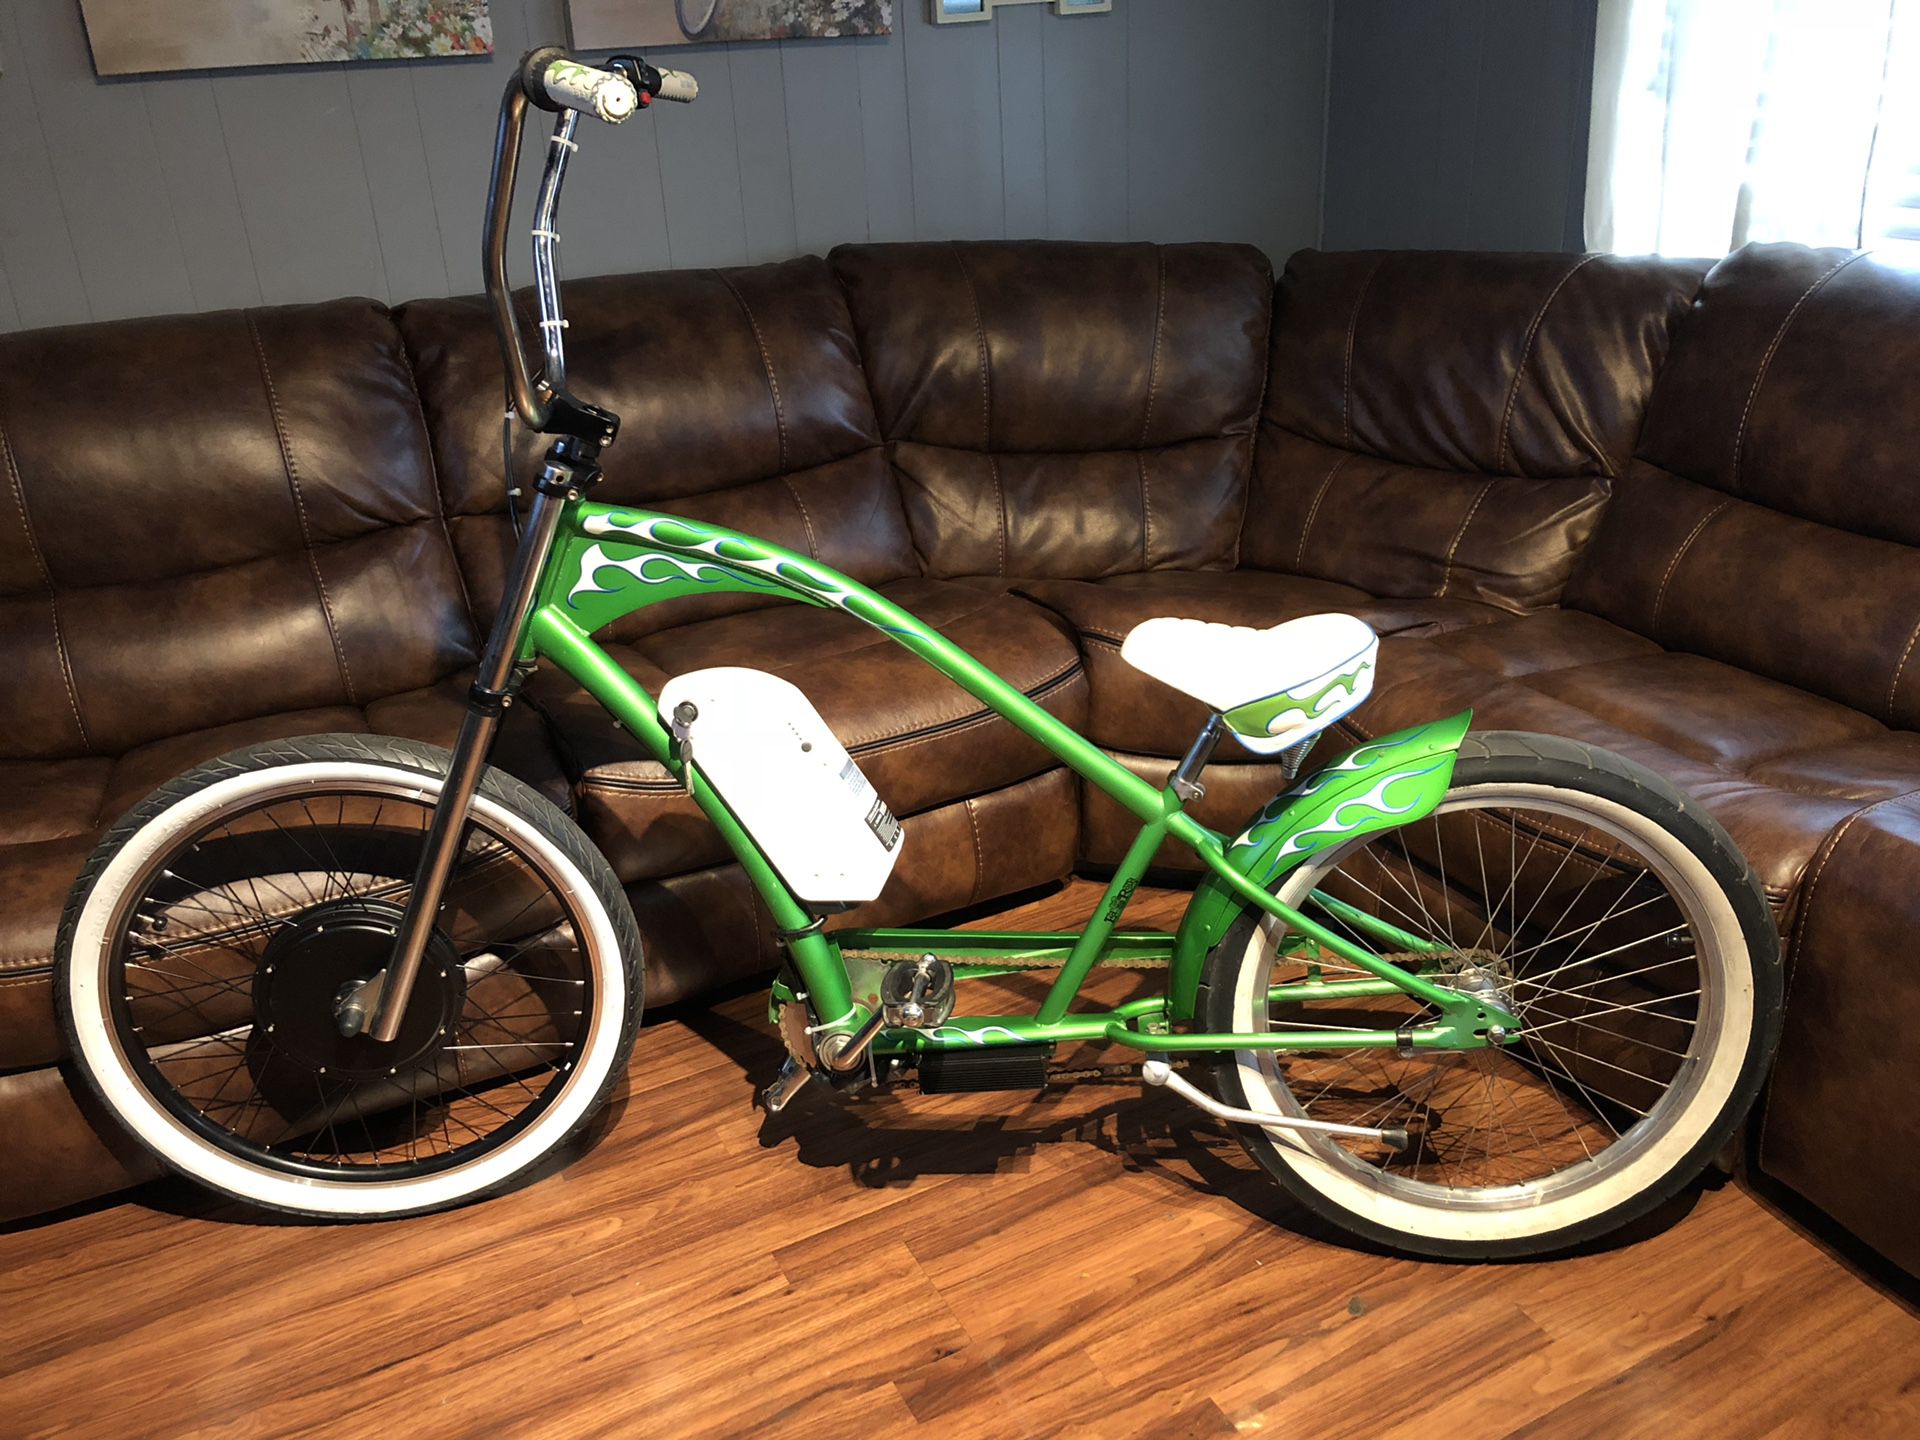 Electric bicycle limited edition Rat Fink Electra cruiser new motor and Panasonic lithium battery with fast eBike beach cruiser bike